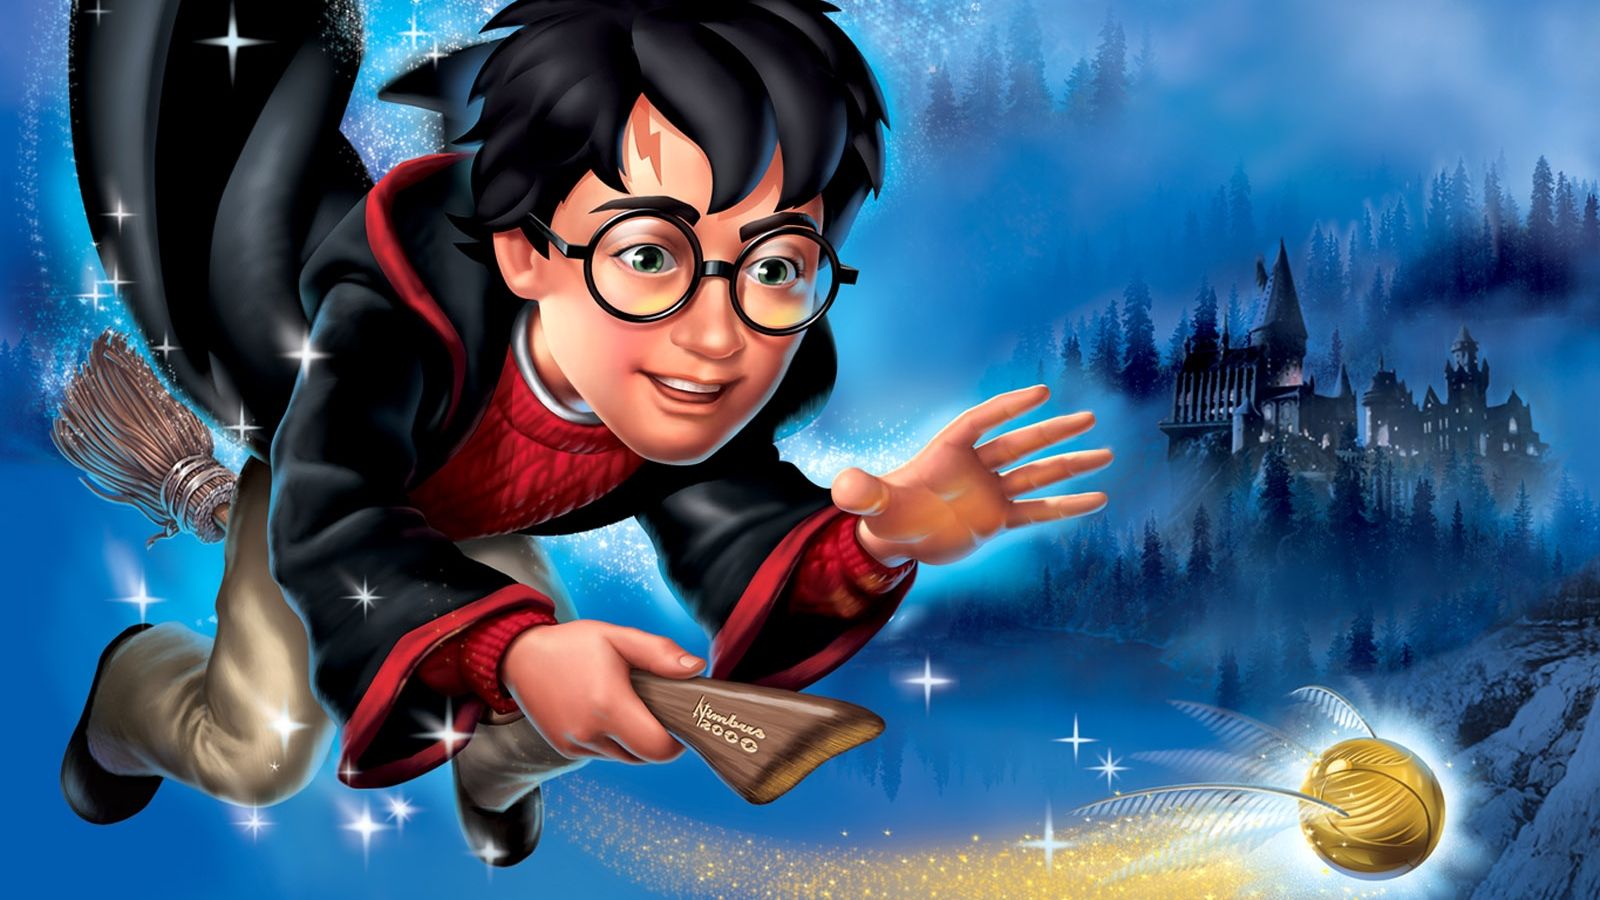 Harry Potter Game Wallpaper Free Harry Potter Game Background